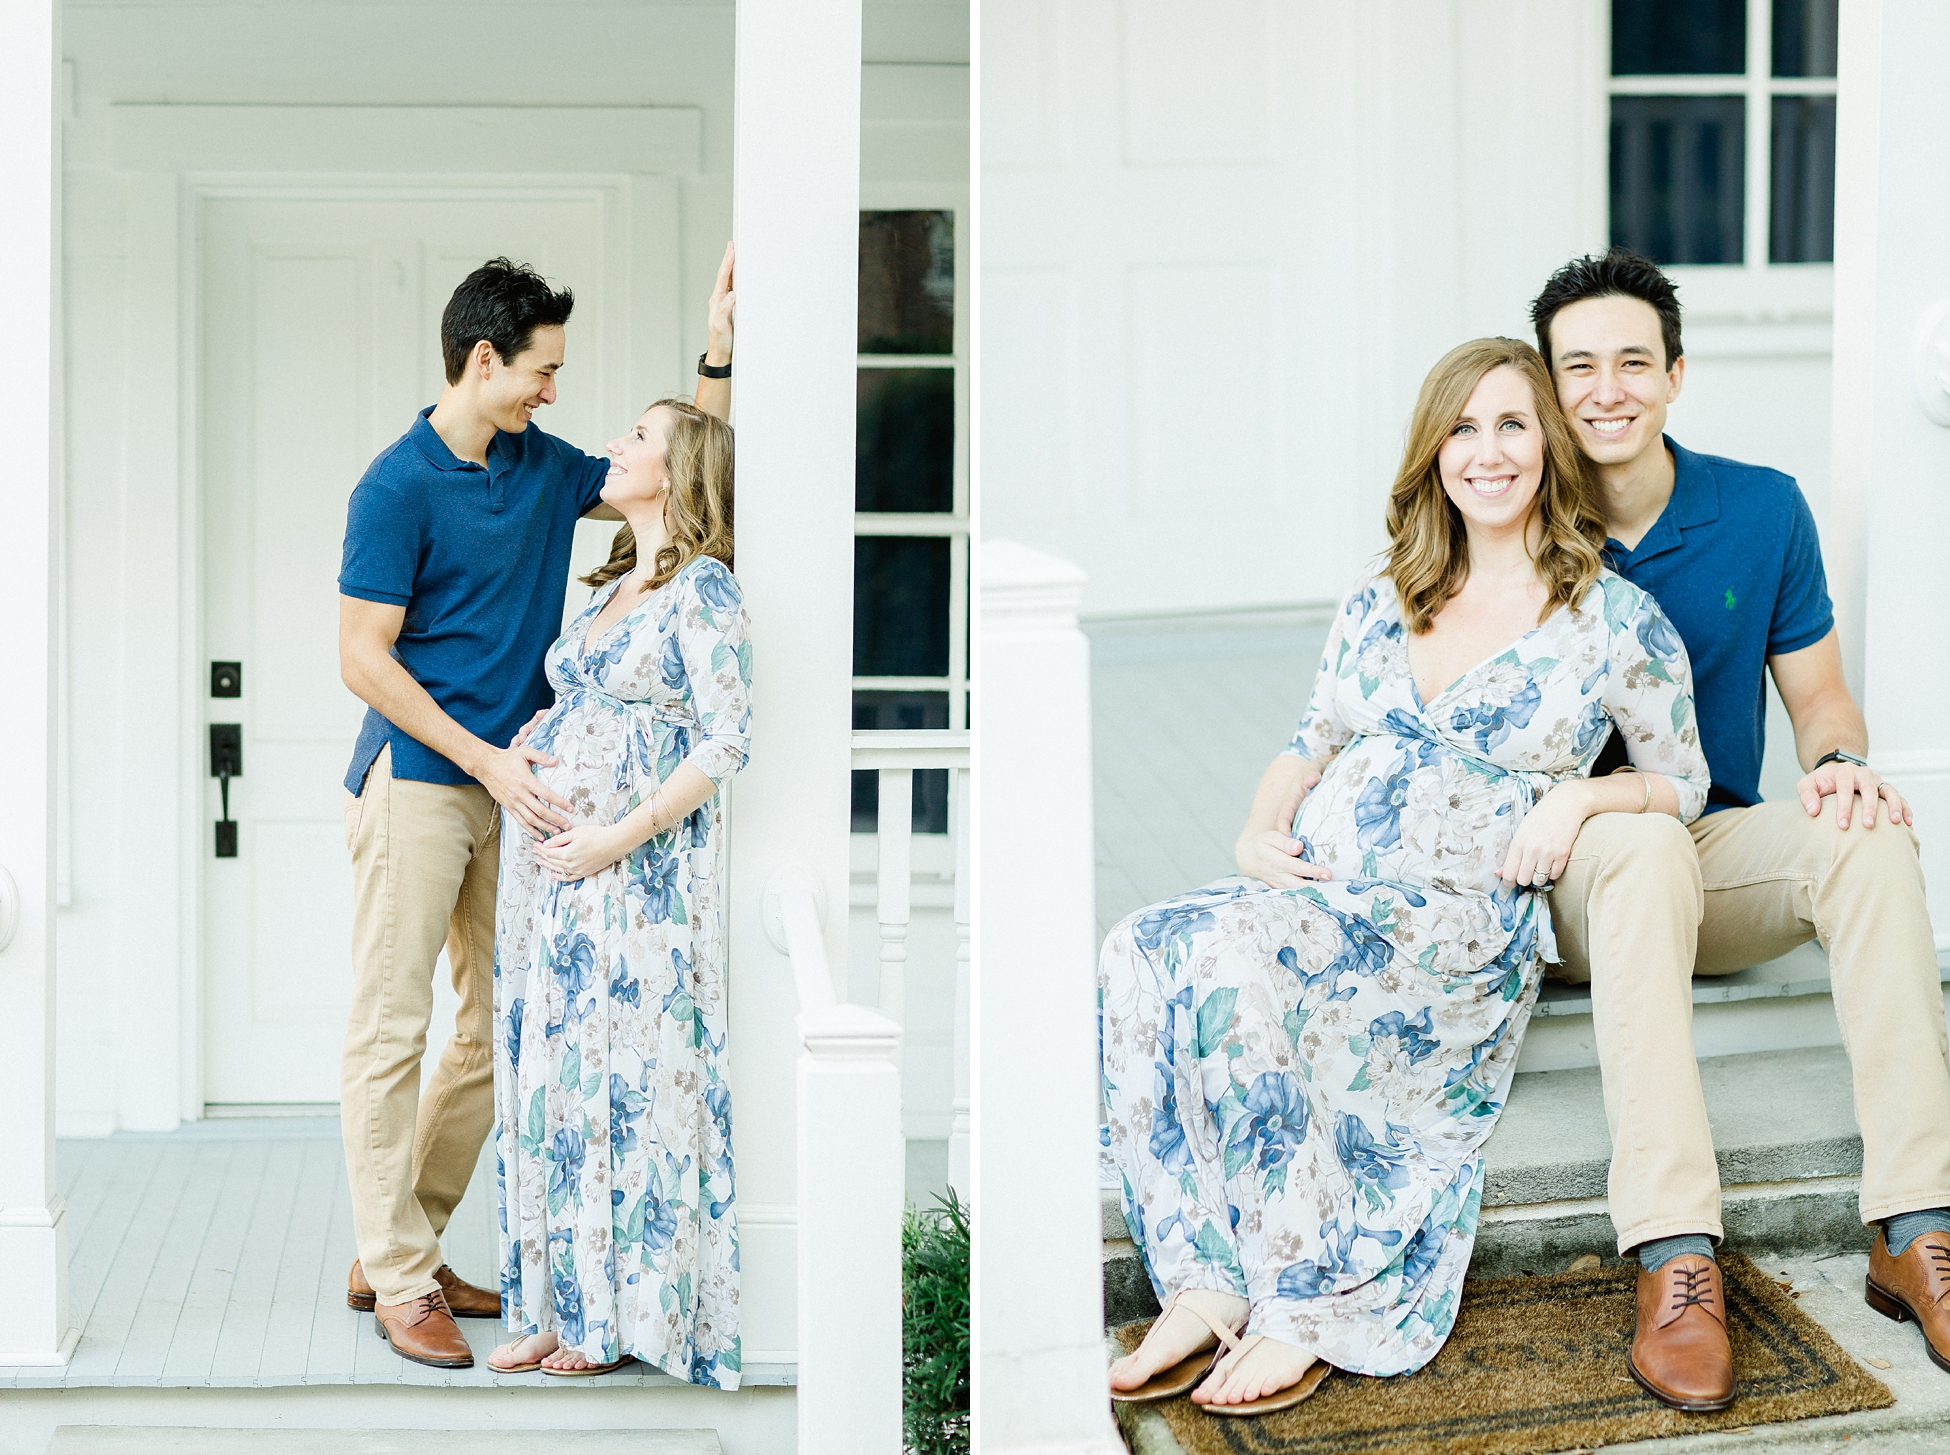 Tampa Maternity Photographer | © Ailyn La Torre Photography 2018